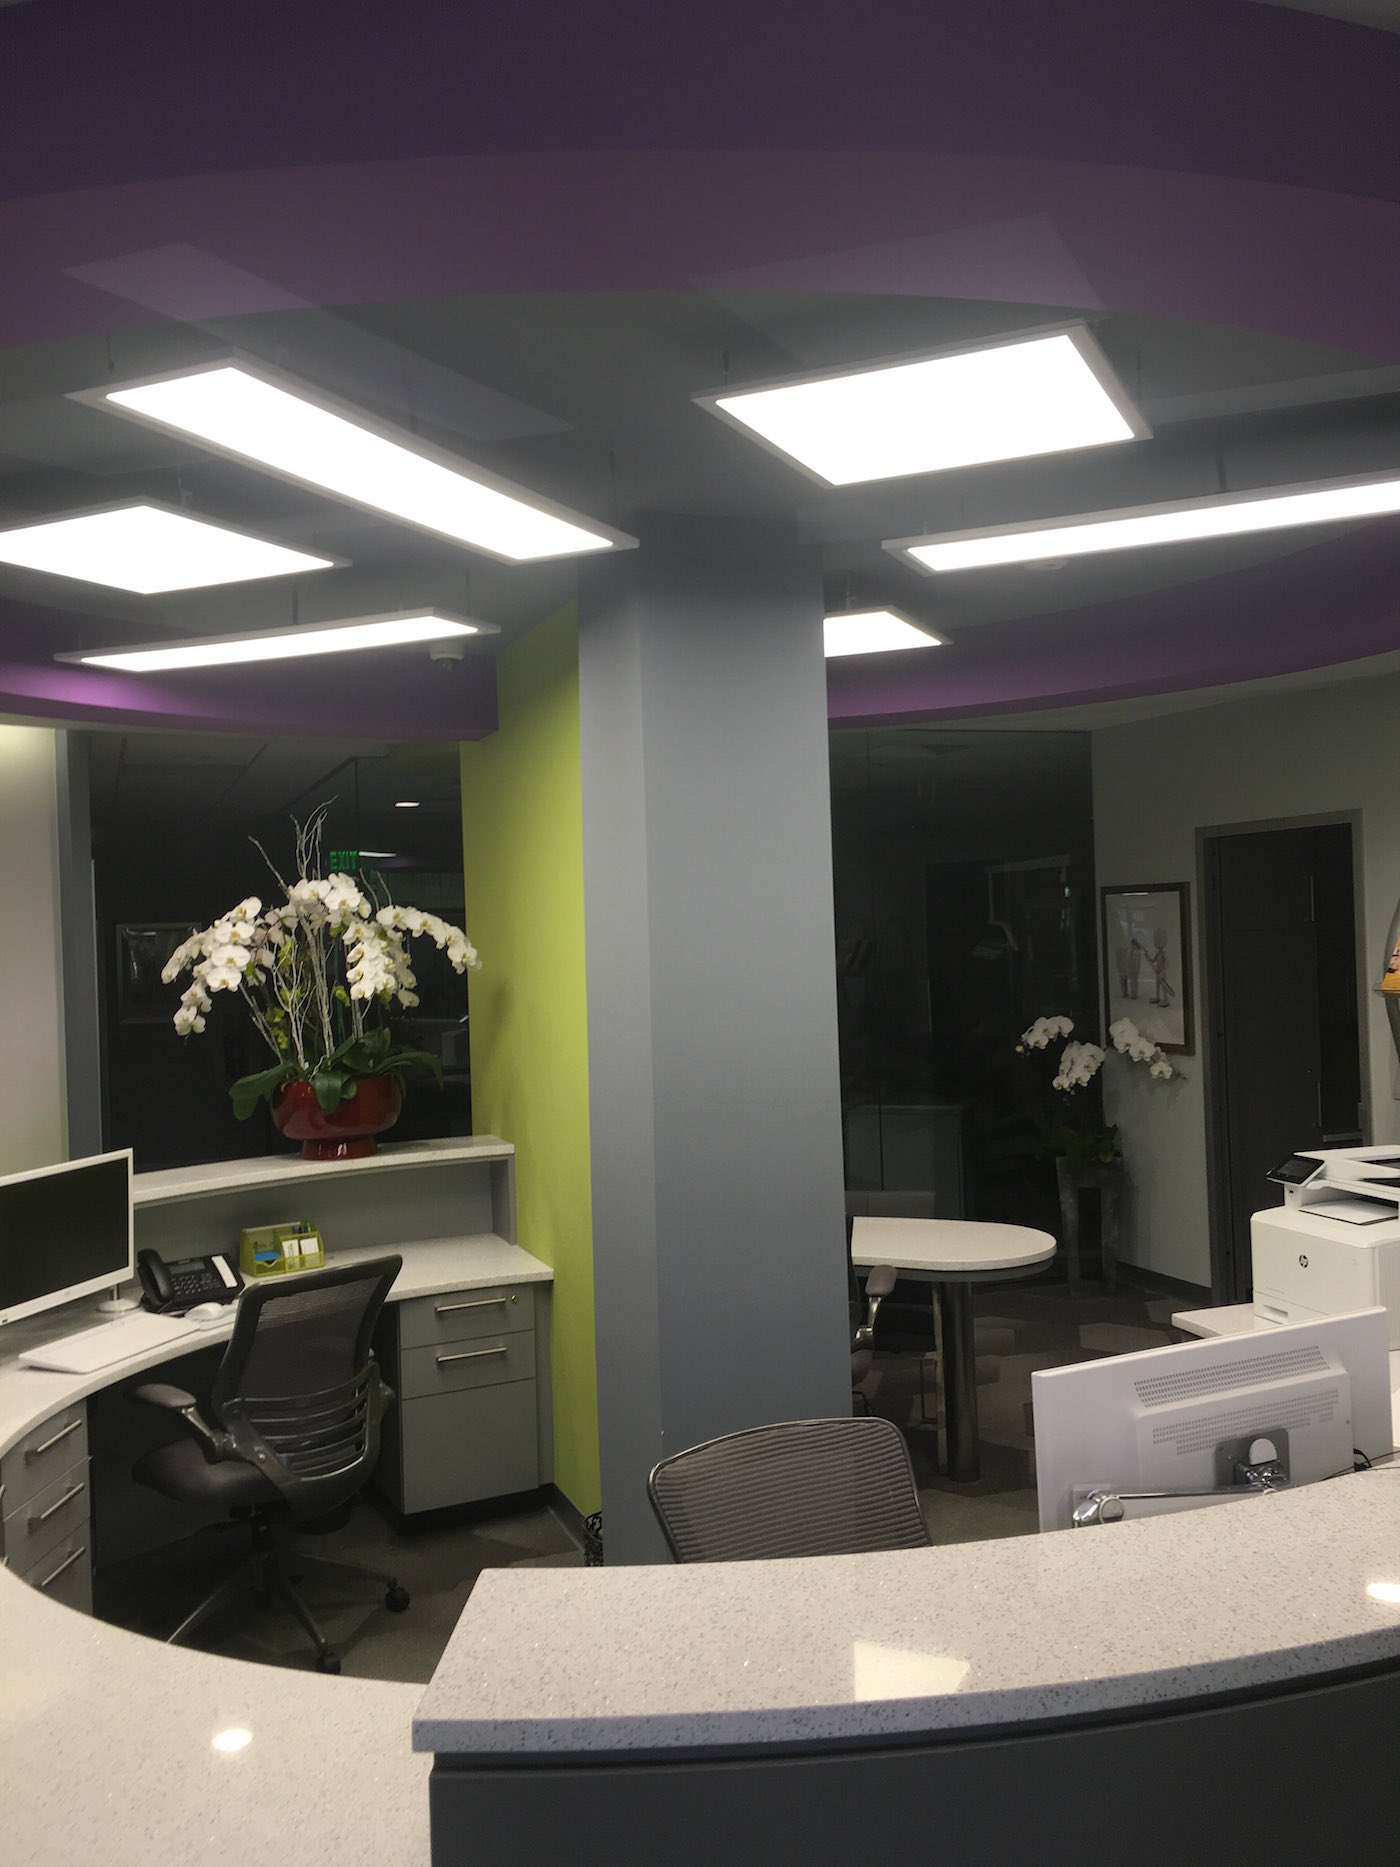 Lighting over a reception desk in an office setting